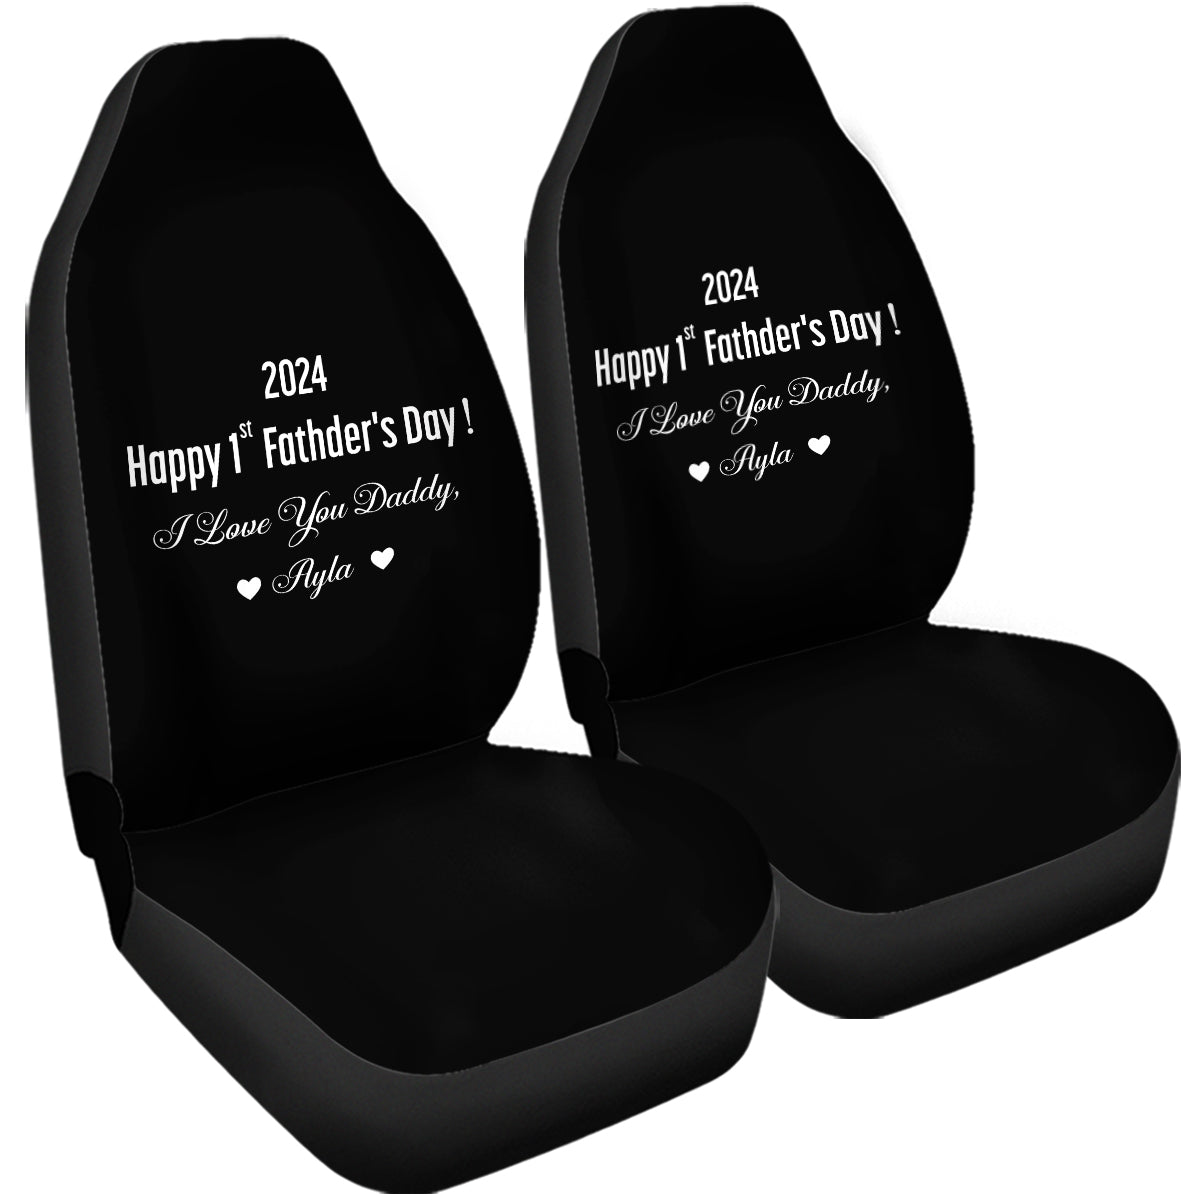 Car Seat Covers, Custom For Your Cars, I Love You Daddy, Happy Father's Day, Car Bucket Seat Protection Airbag Compatible 2 PCS, Car Accessories, Gift for Daddy 01